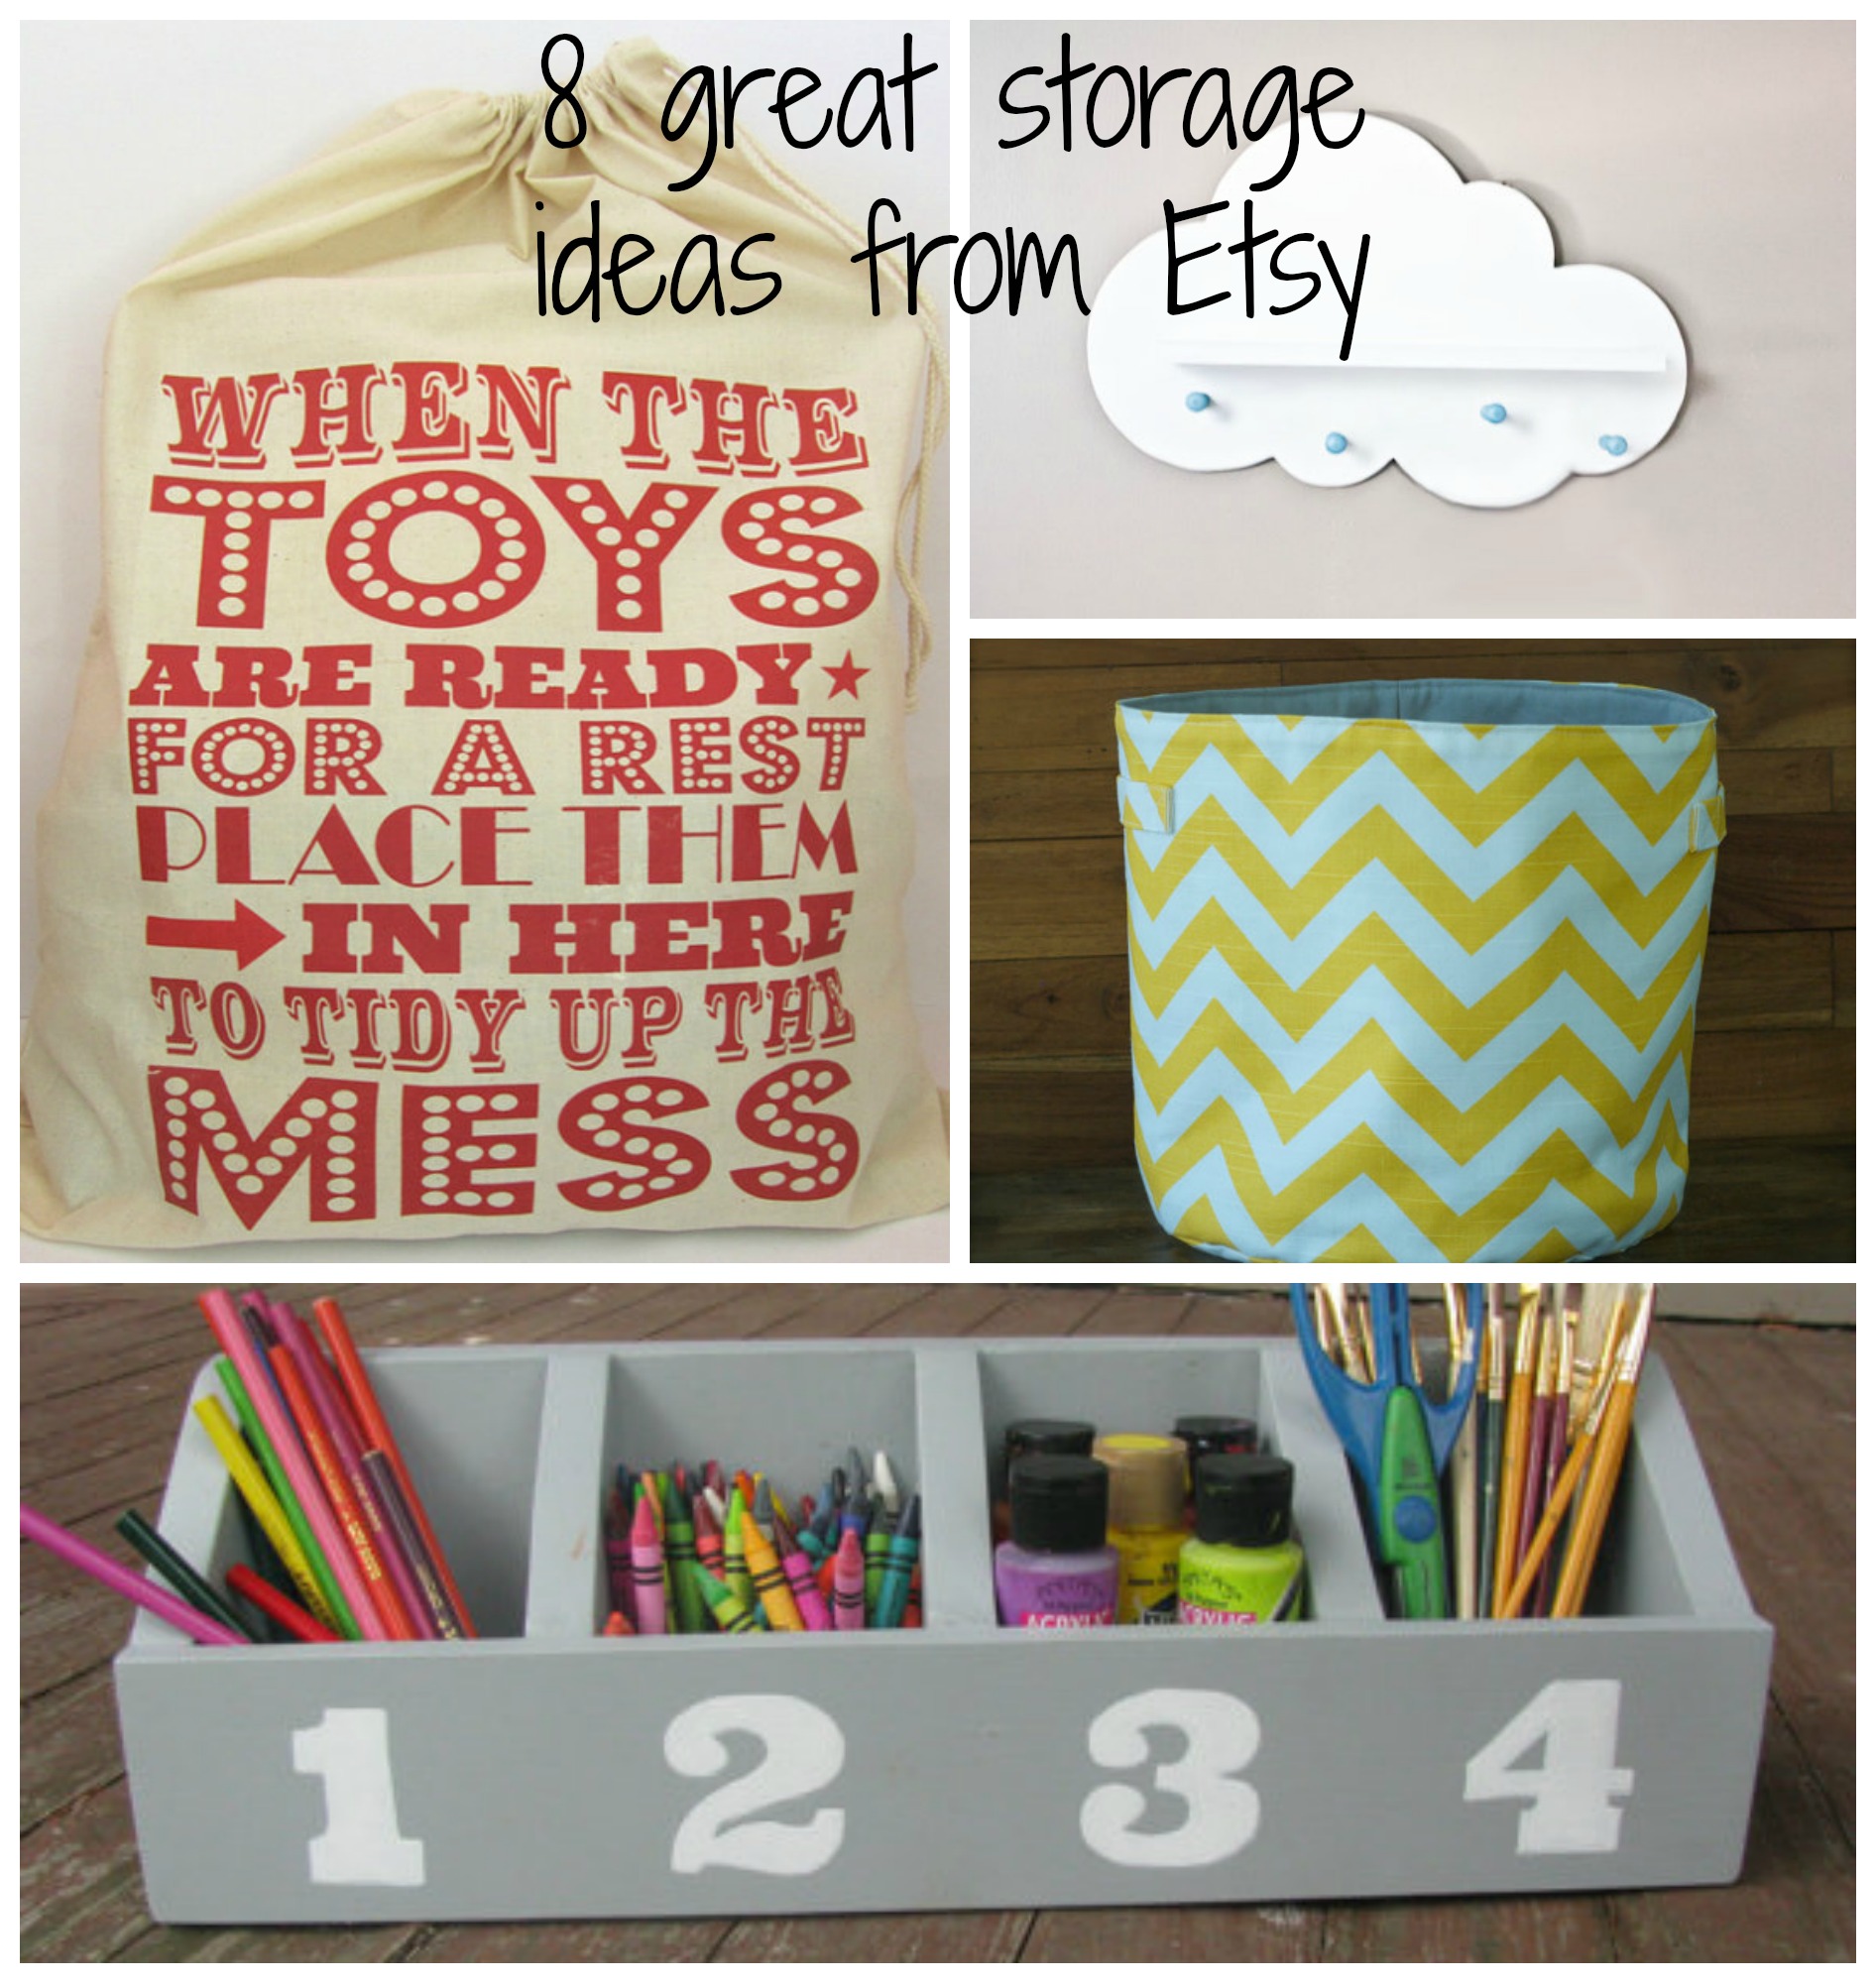 Toy storage ideas from Etsy